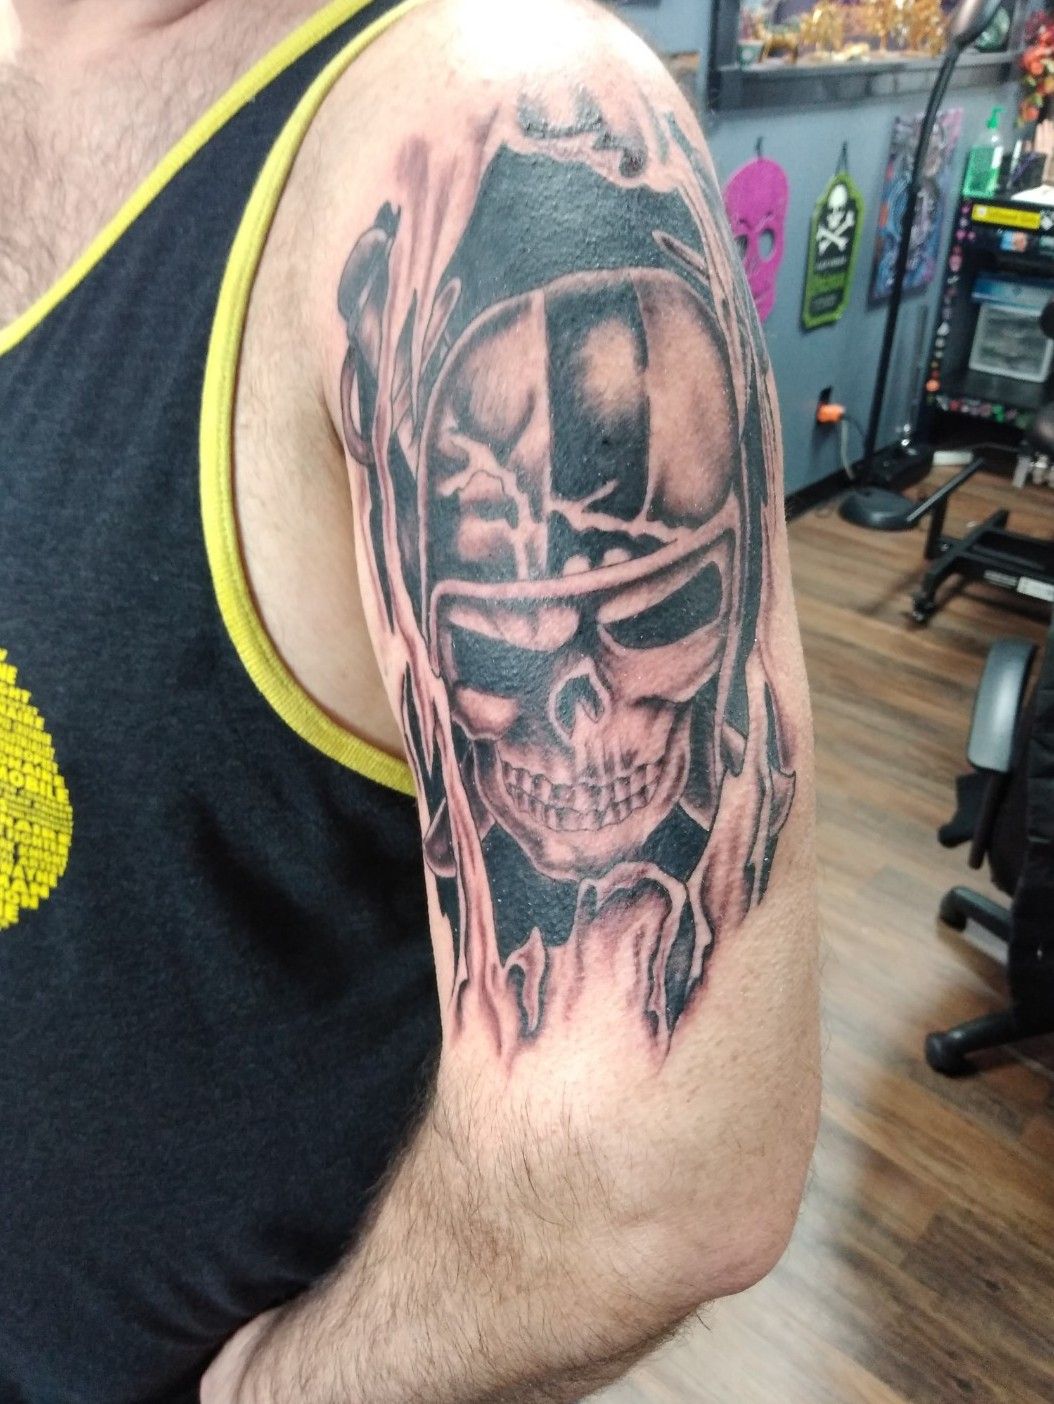 Raiders Tattoos Designs Ideas and Meaning  Tattoos For You